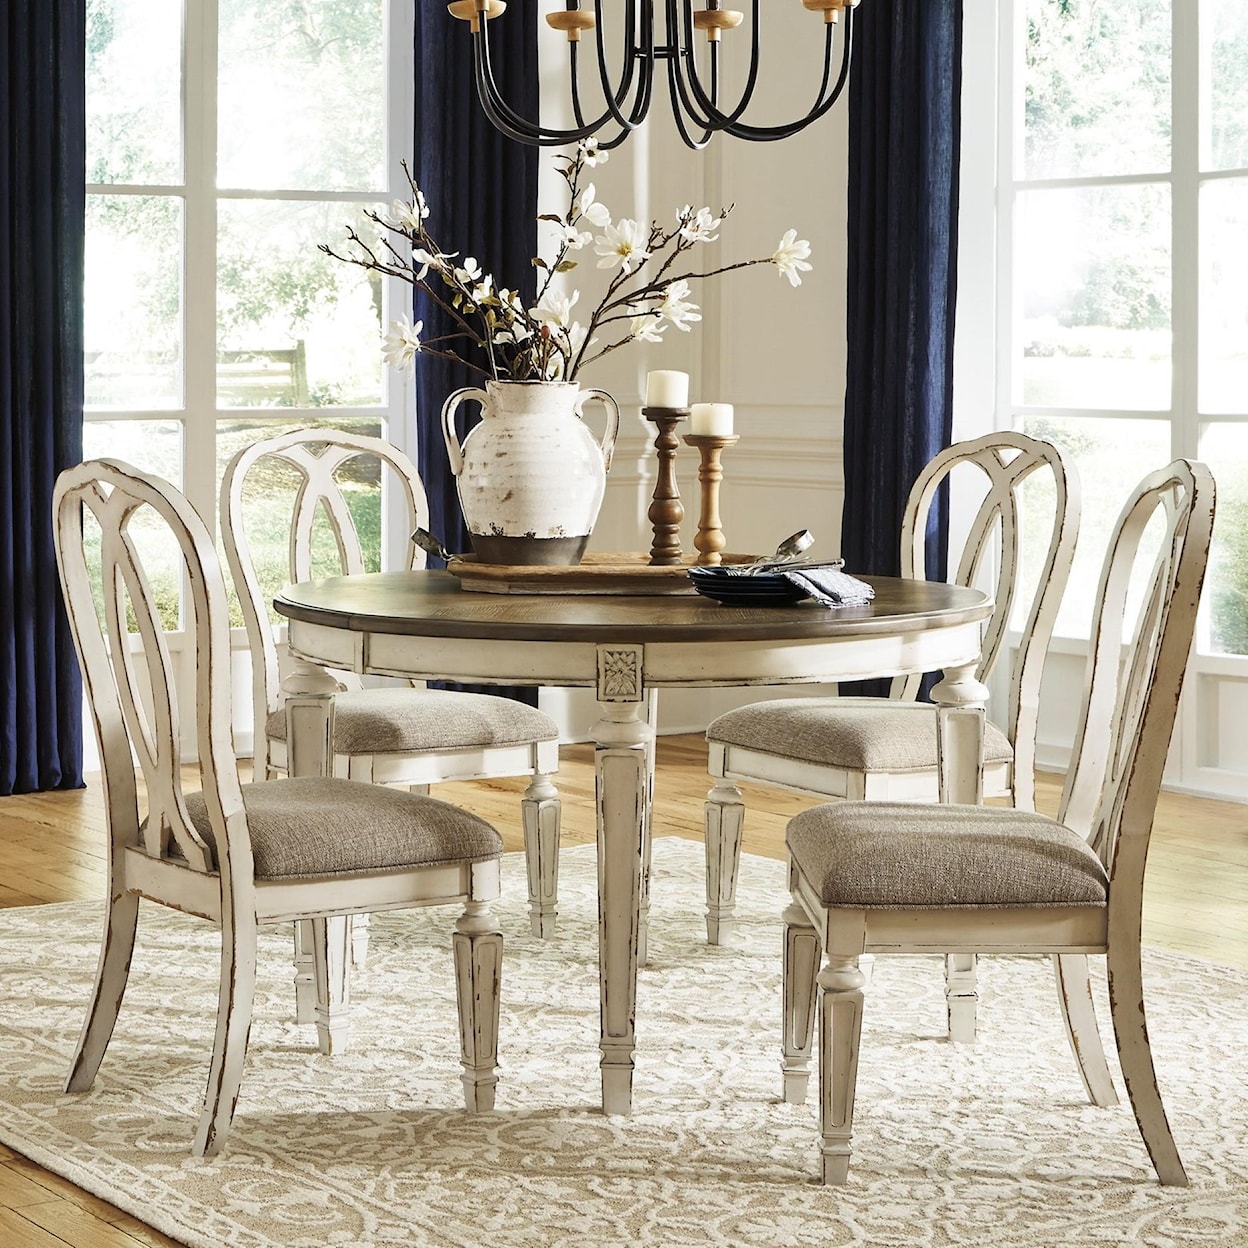 Ashley Furniture Signature Design Realyn 5-Piece Table and Chair Set